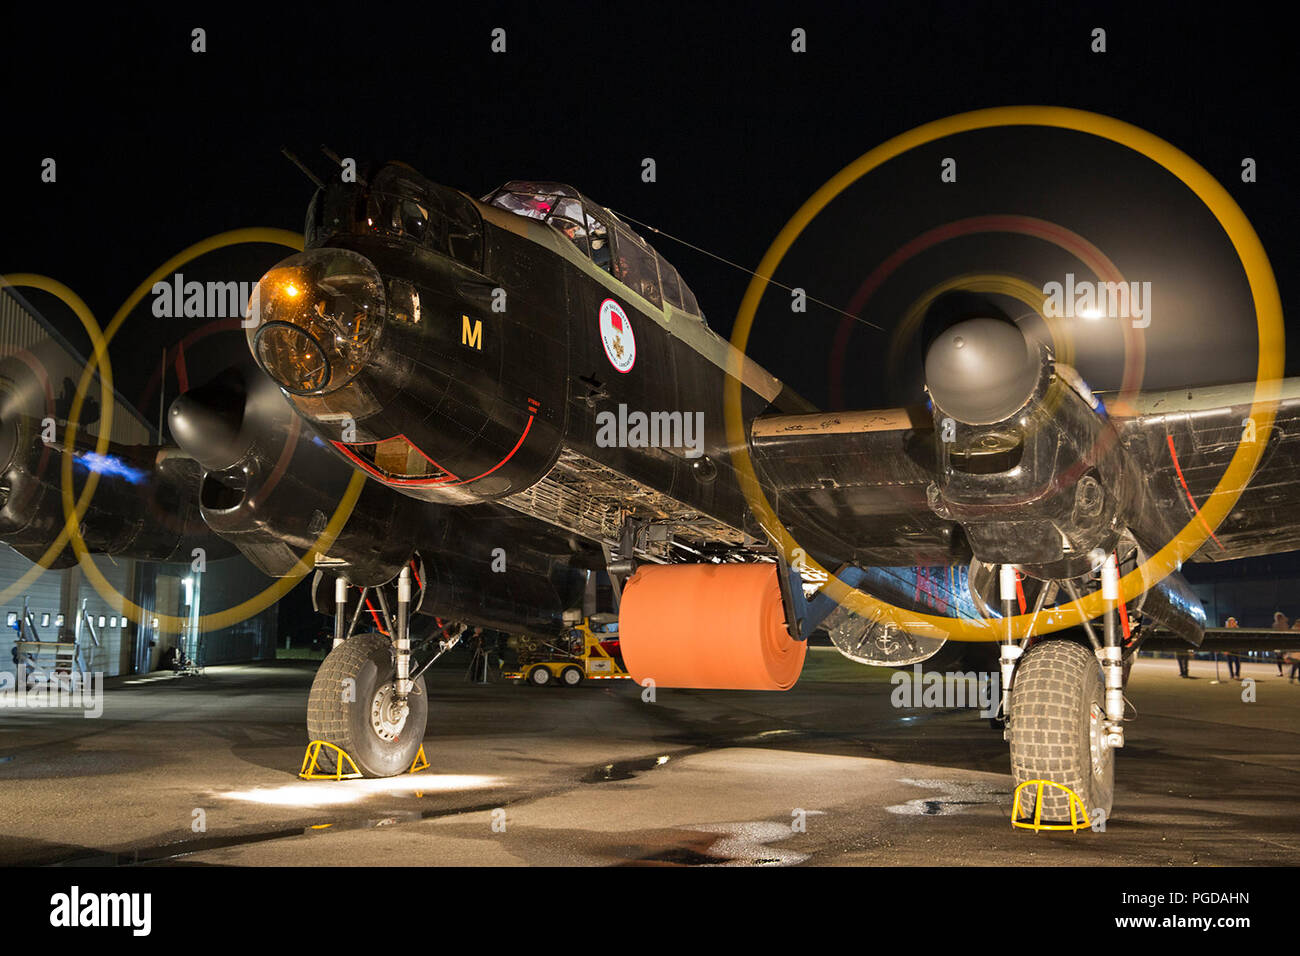 Nanton, Canada. 24th August, 2018.  Lancaster Bomber with a full-size, steel bouncing bomb spinning in the bomb-bay is started up during a night engine run at the Bomber Command Museum of Canada . The event is part of a 75th anniversary commemoration of the Dambusters Raid during World War II. Rosanne Tackaberry/Alamy Live News Stock Photo